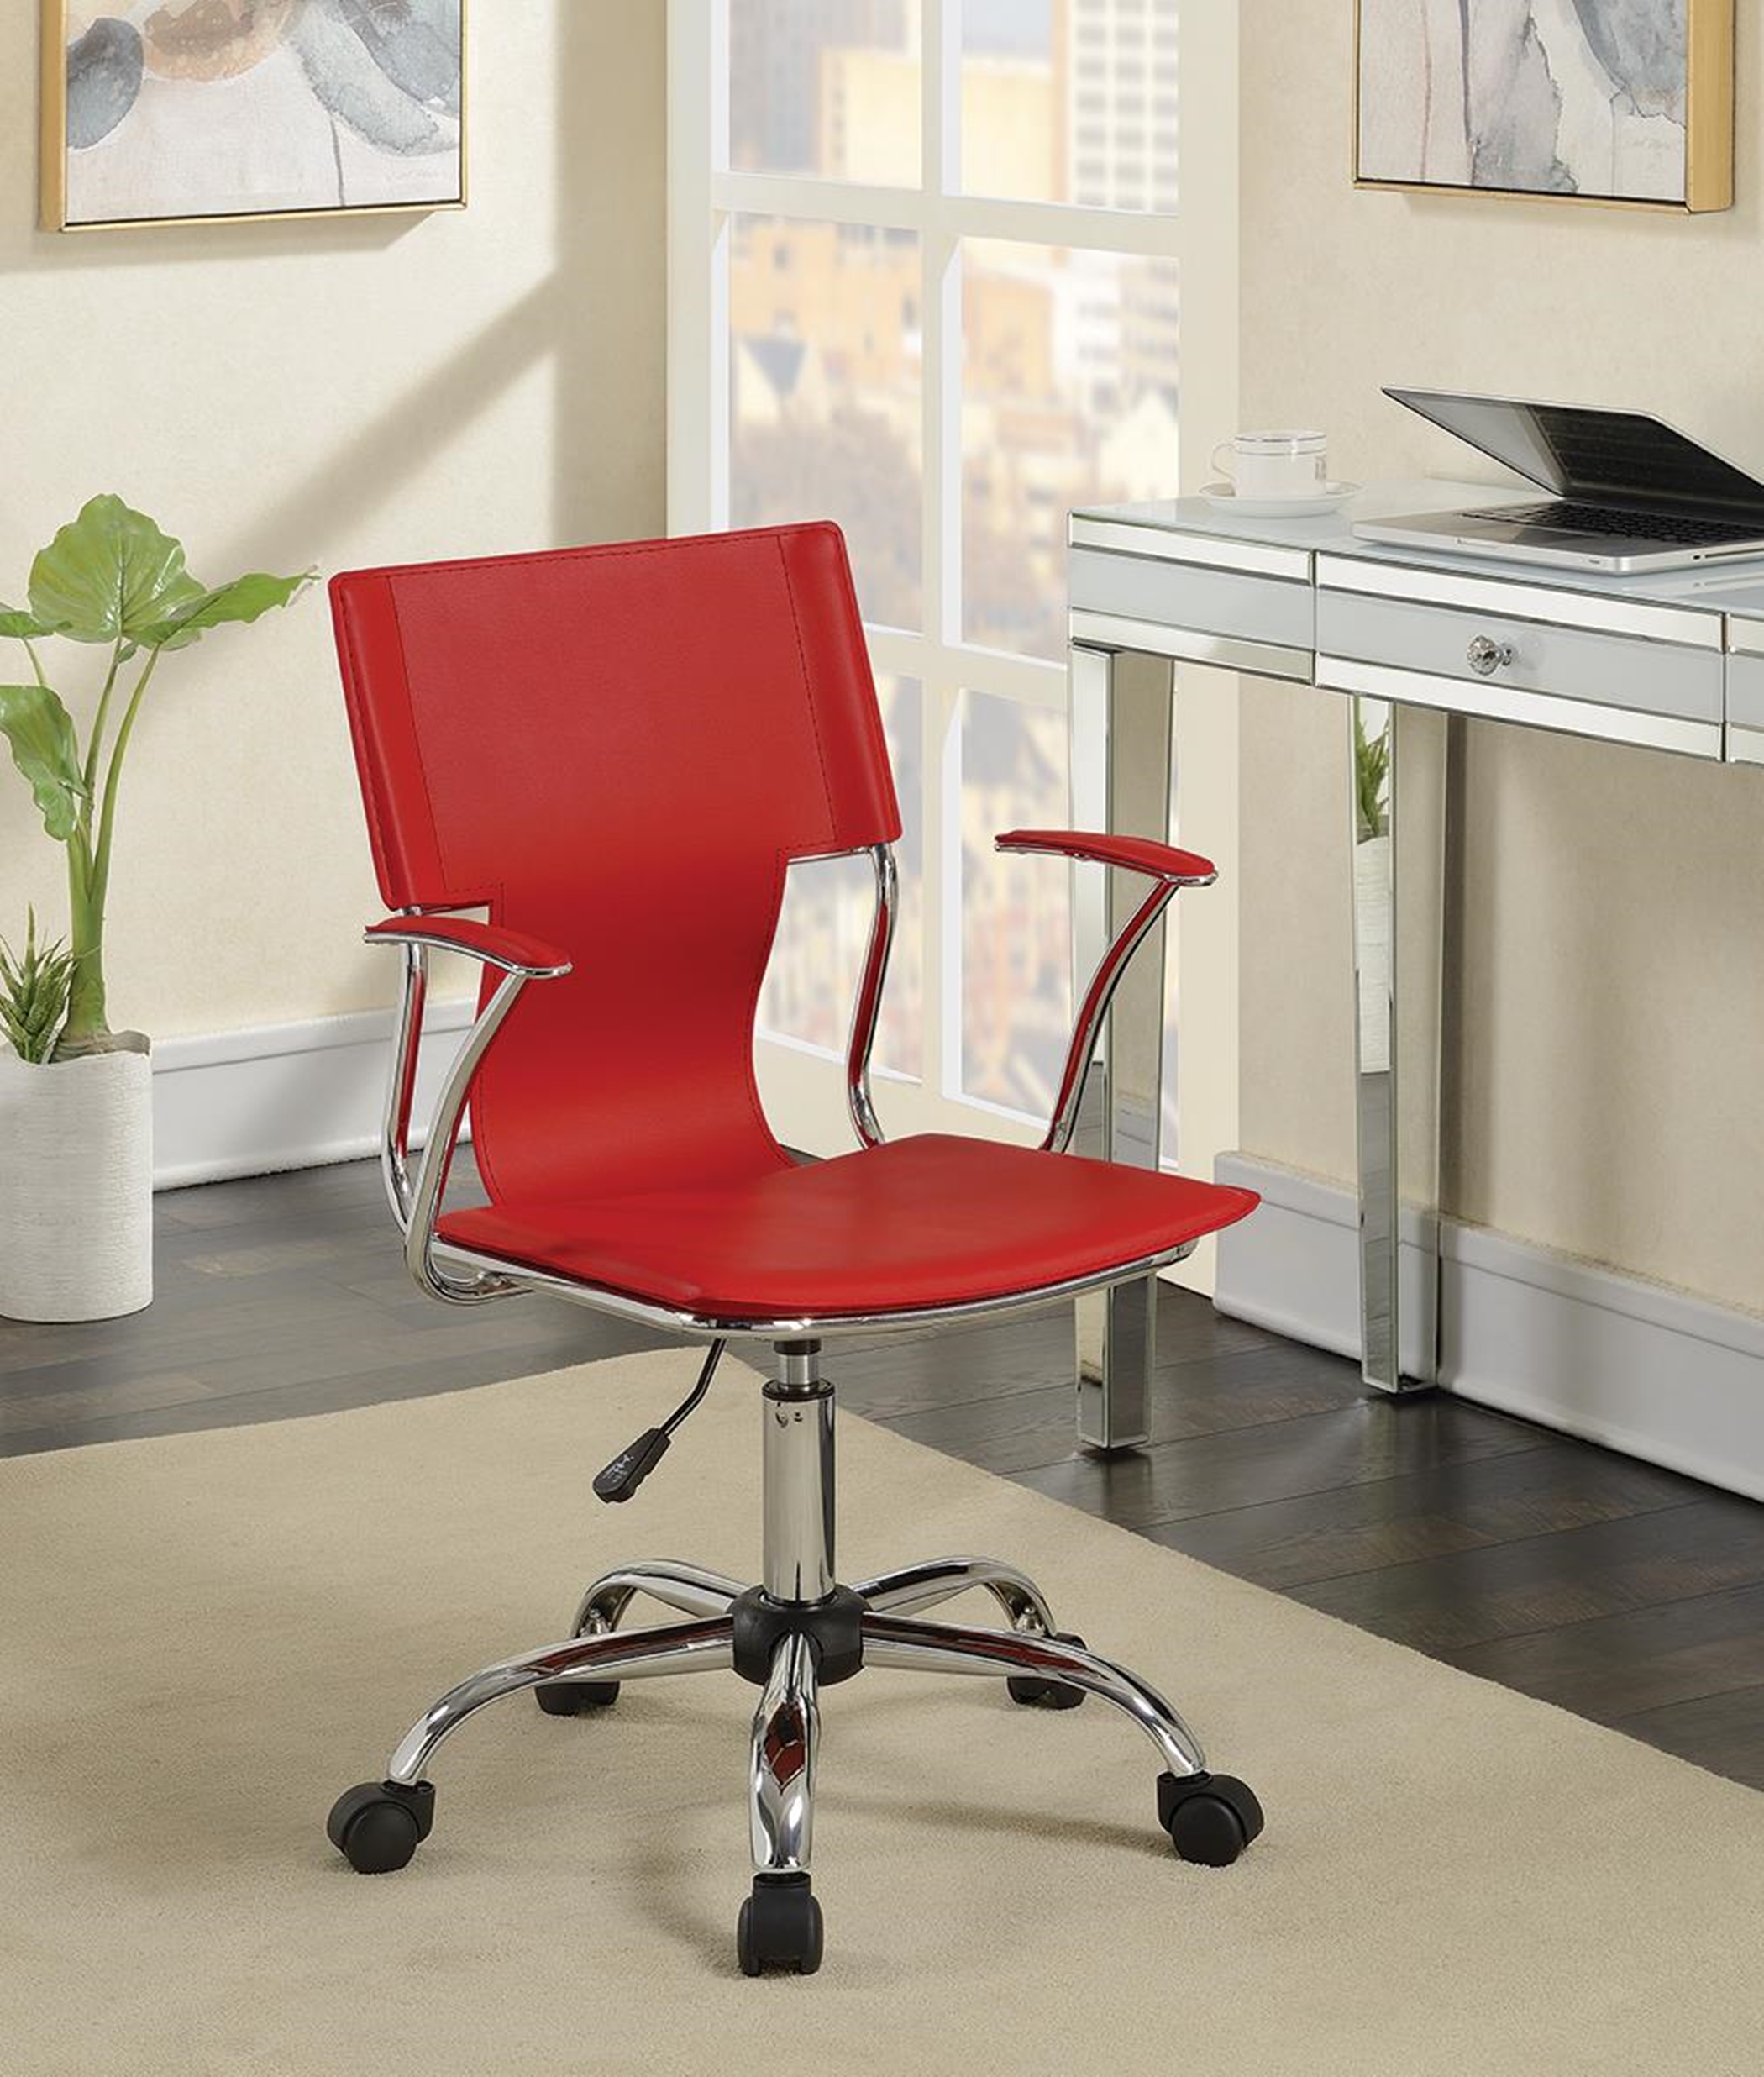 Contemporary Red Office Chair